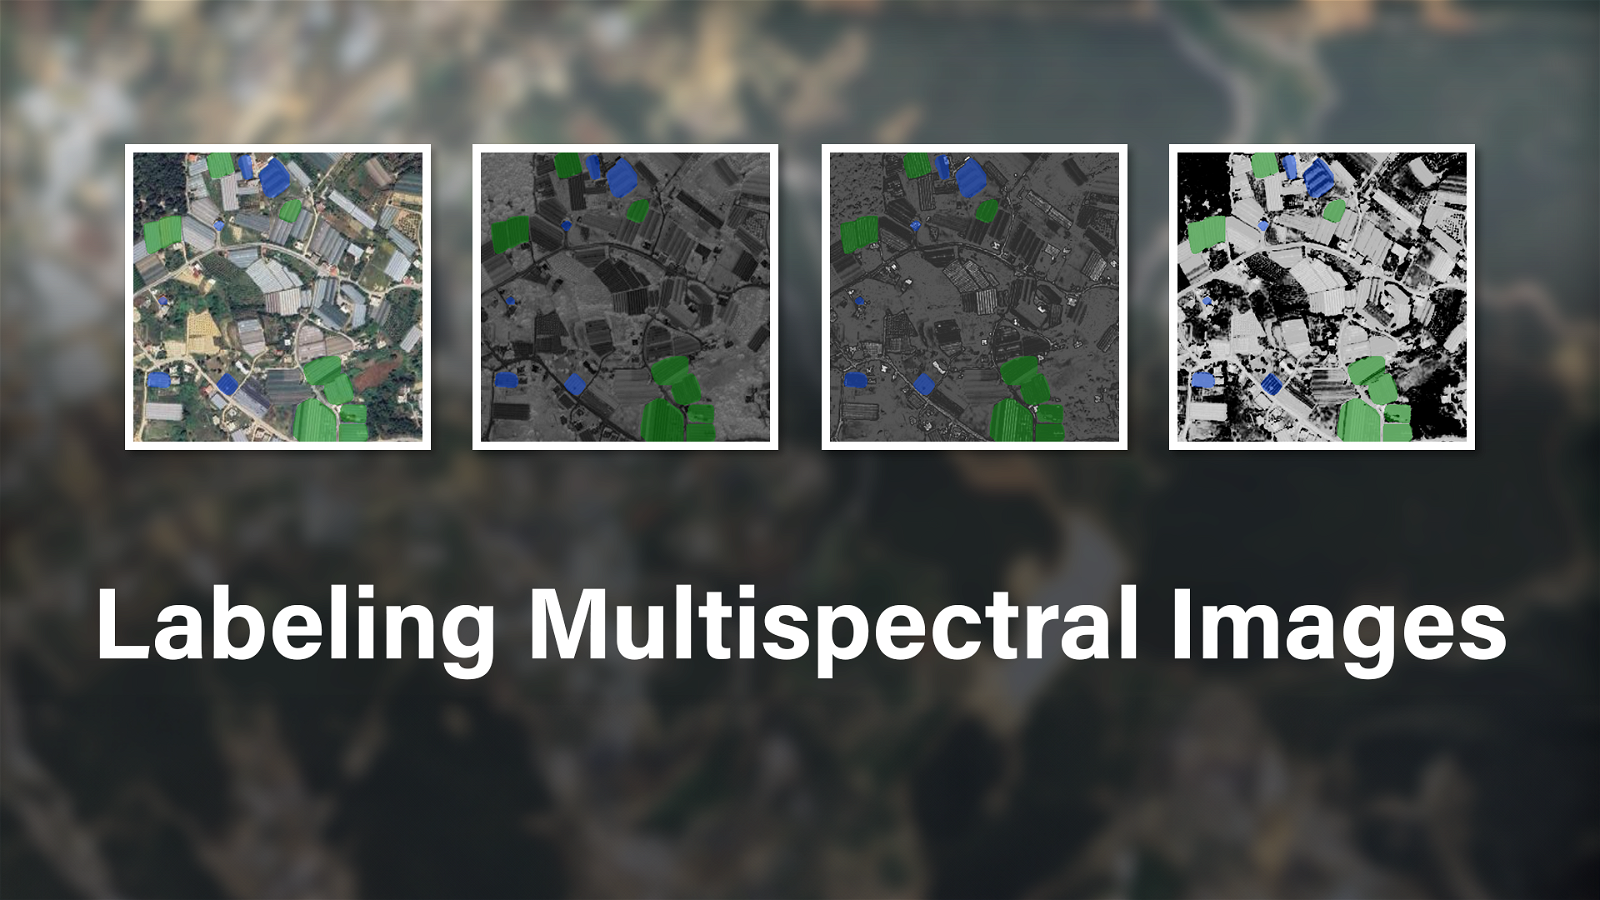 How to Annotate Multispectral Images for Computer Vision Models